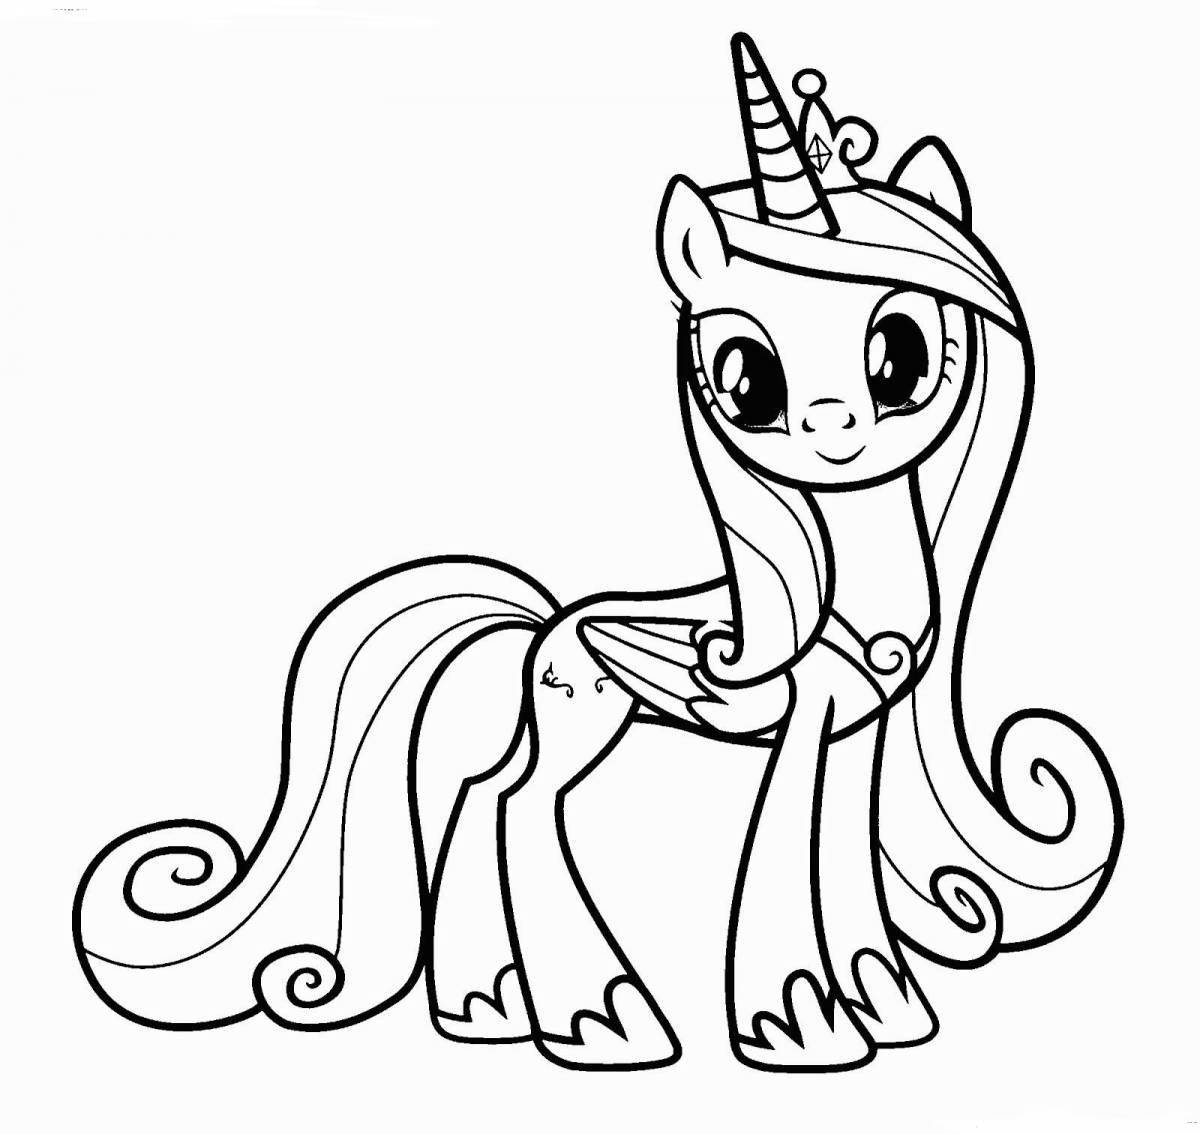 Dazzling Watershine pony coloring page